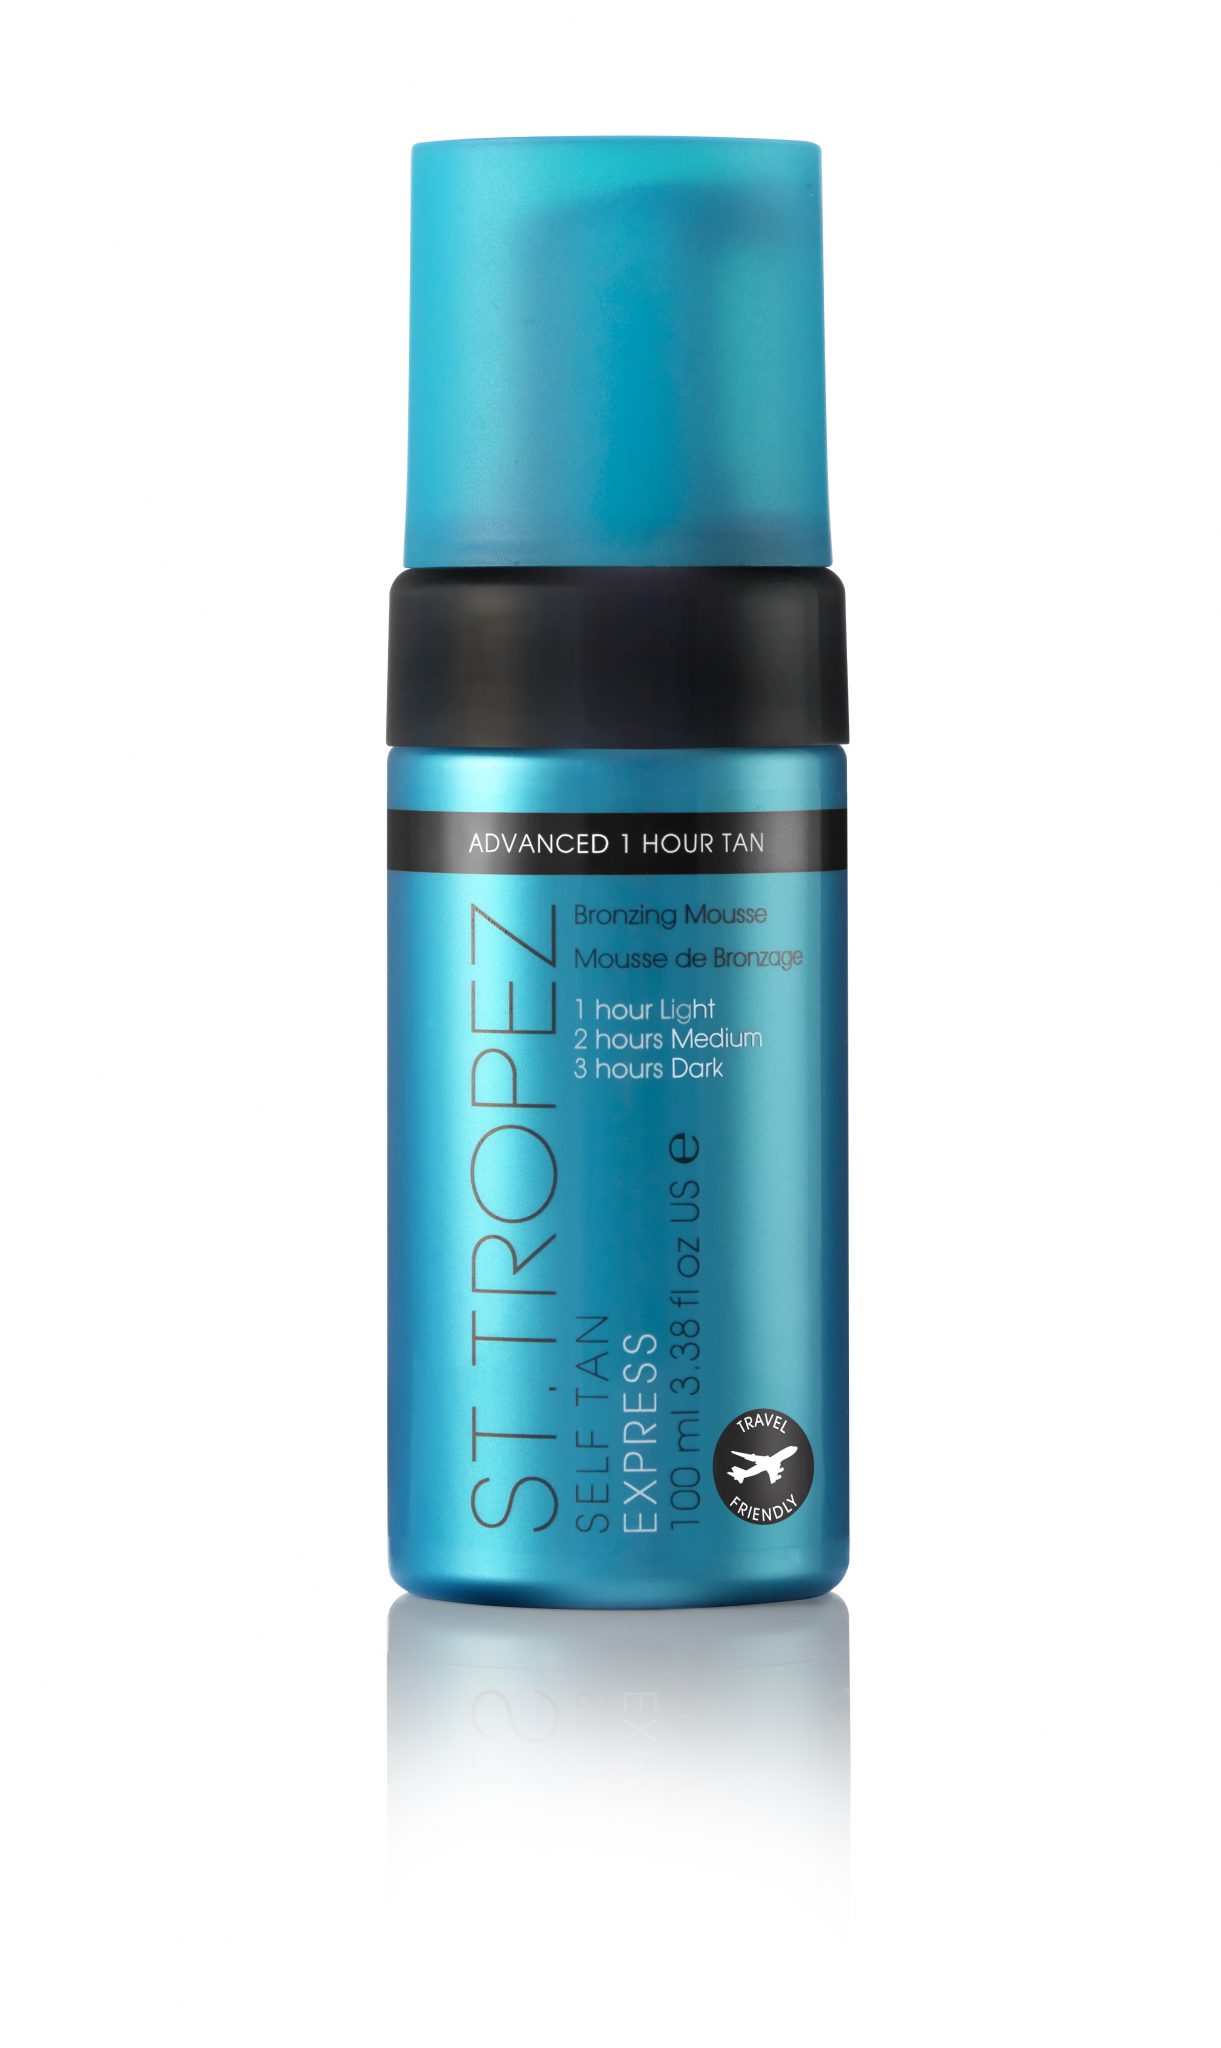 St Tropez Self Tan Express Mousse Mini 100ml Hair products | Nation hairdressing & hair care group